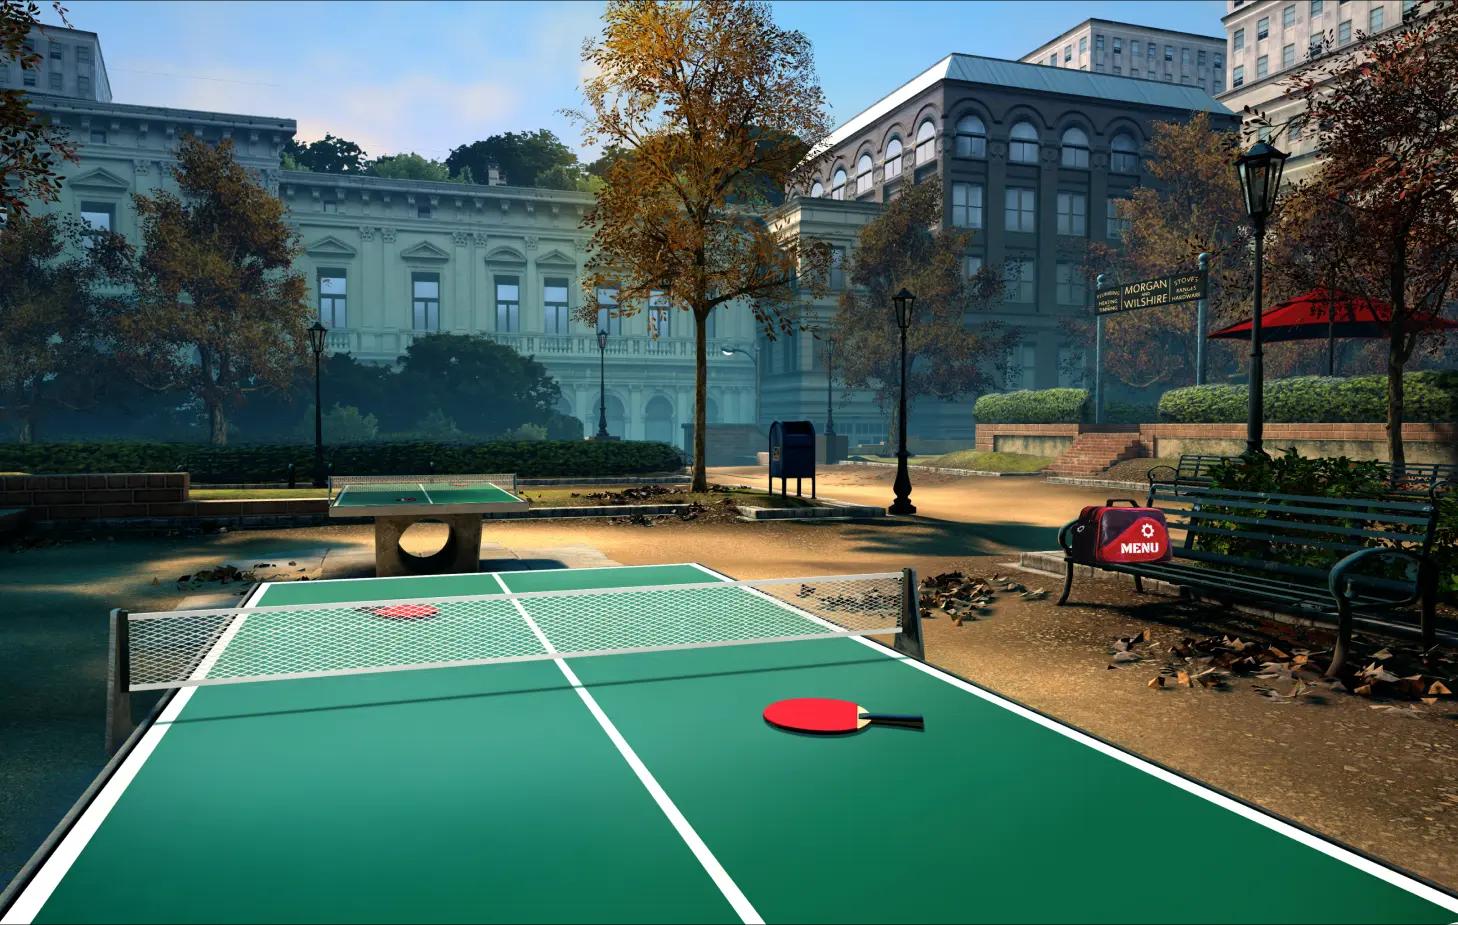 Green ping pong table in a park with historic buildings